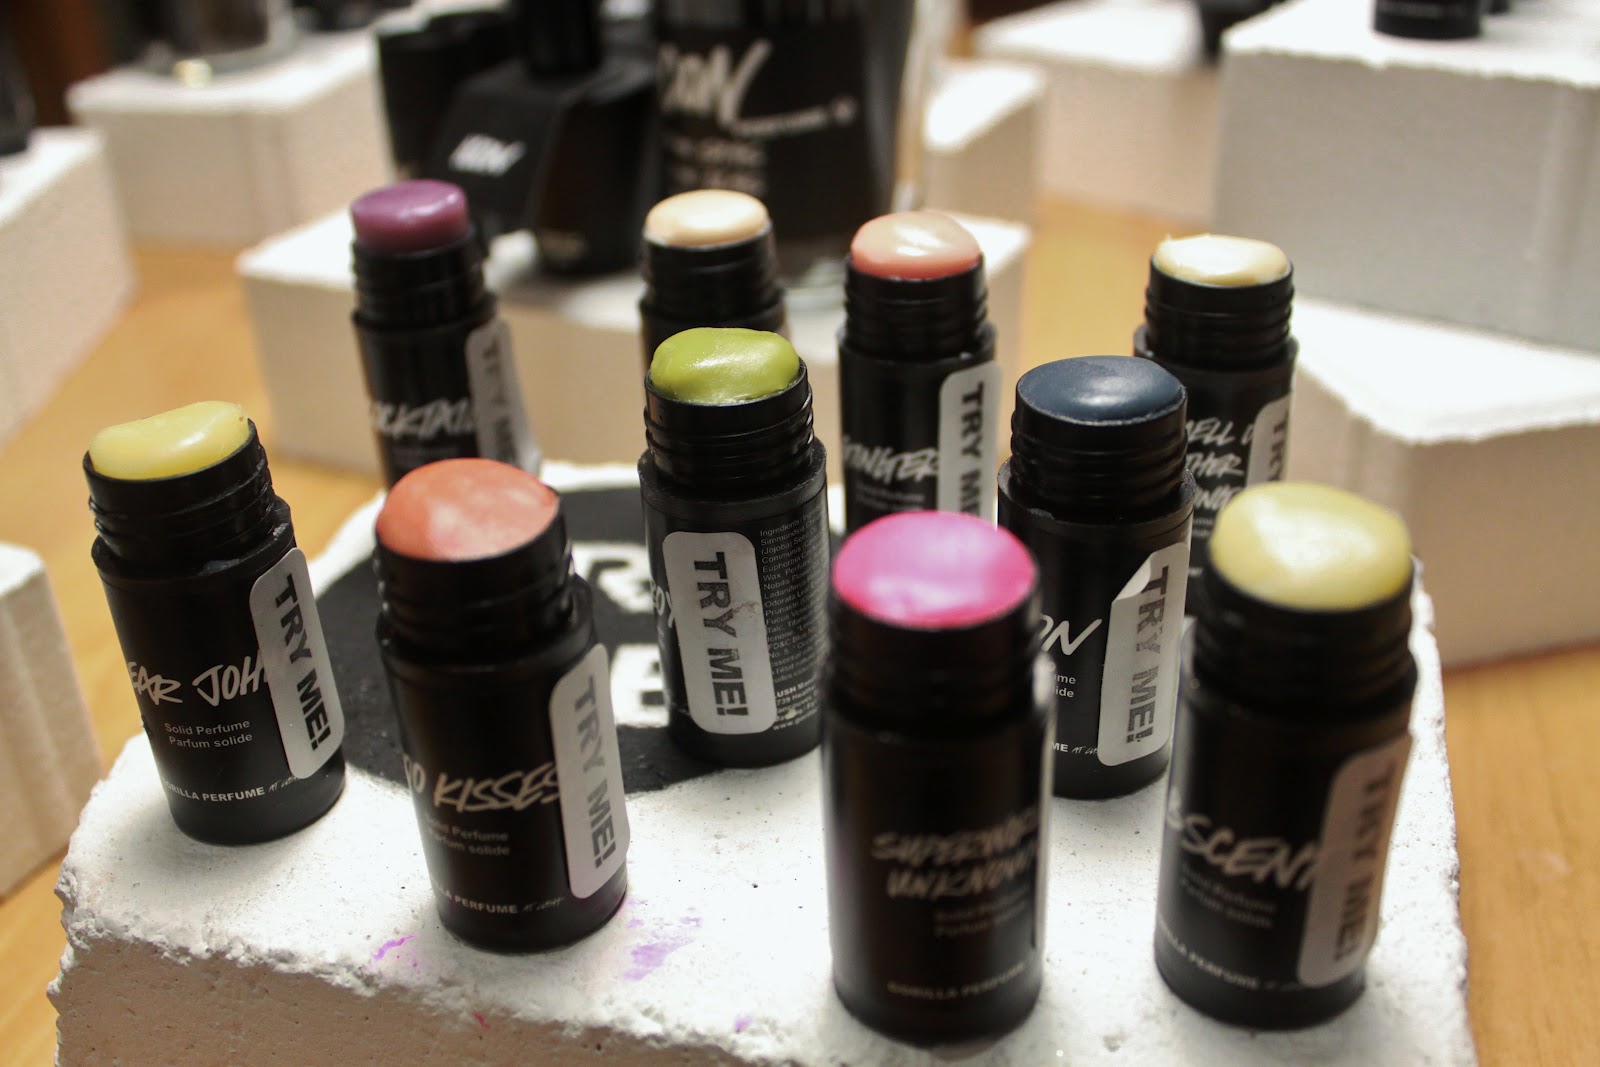 Lush debuts first cosmetics line: Emotional Brilliance + Giveaway! - Just J